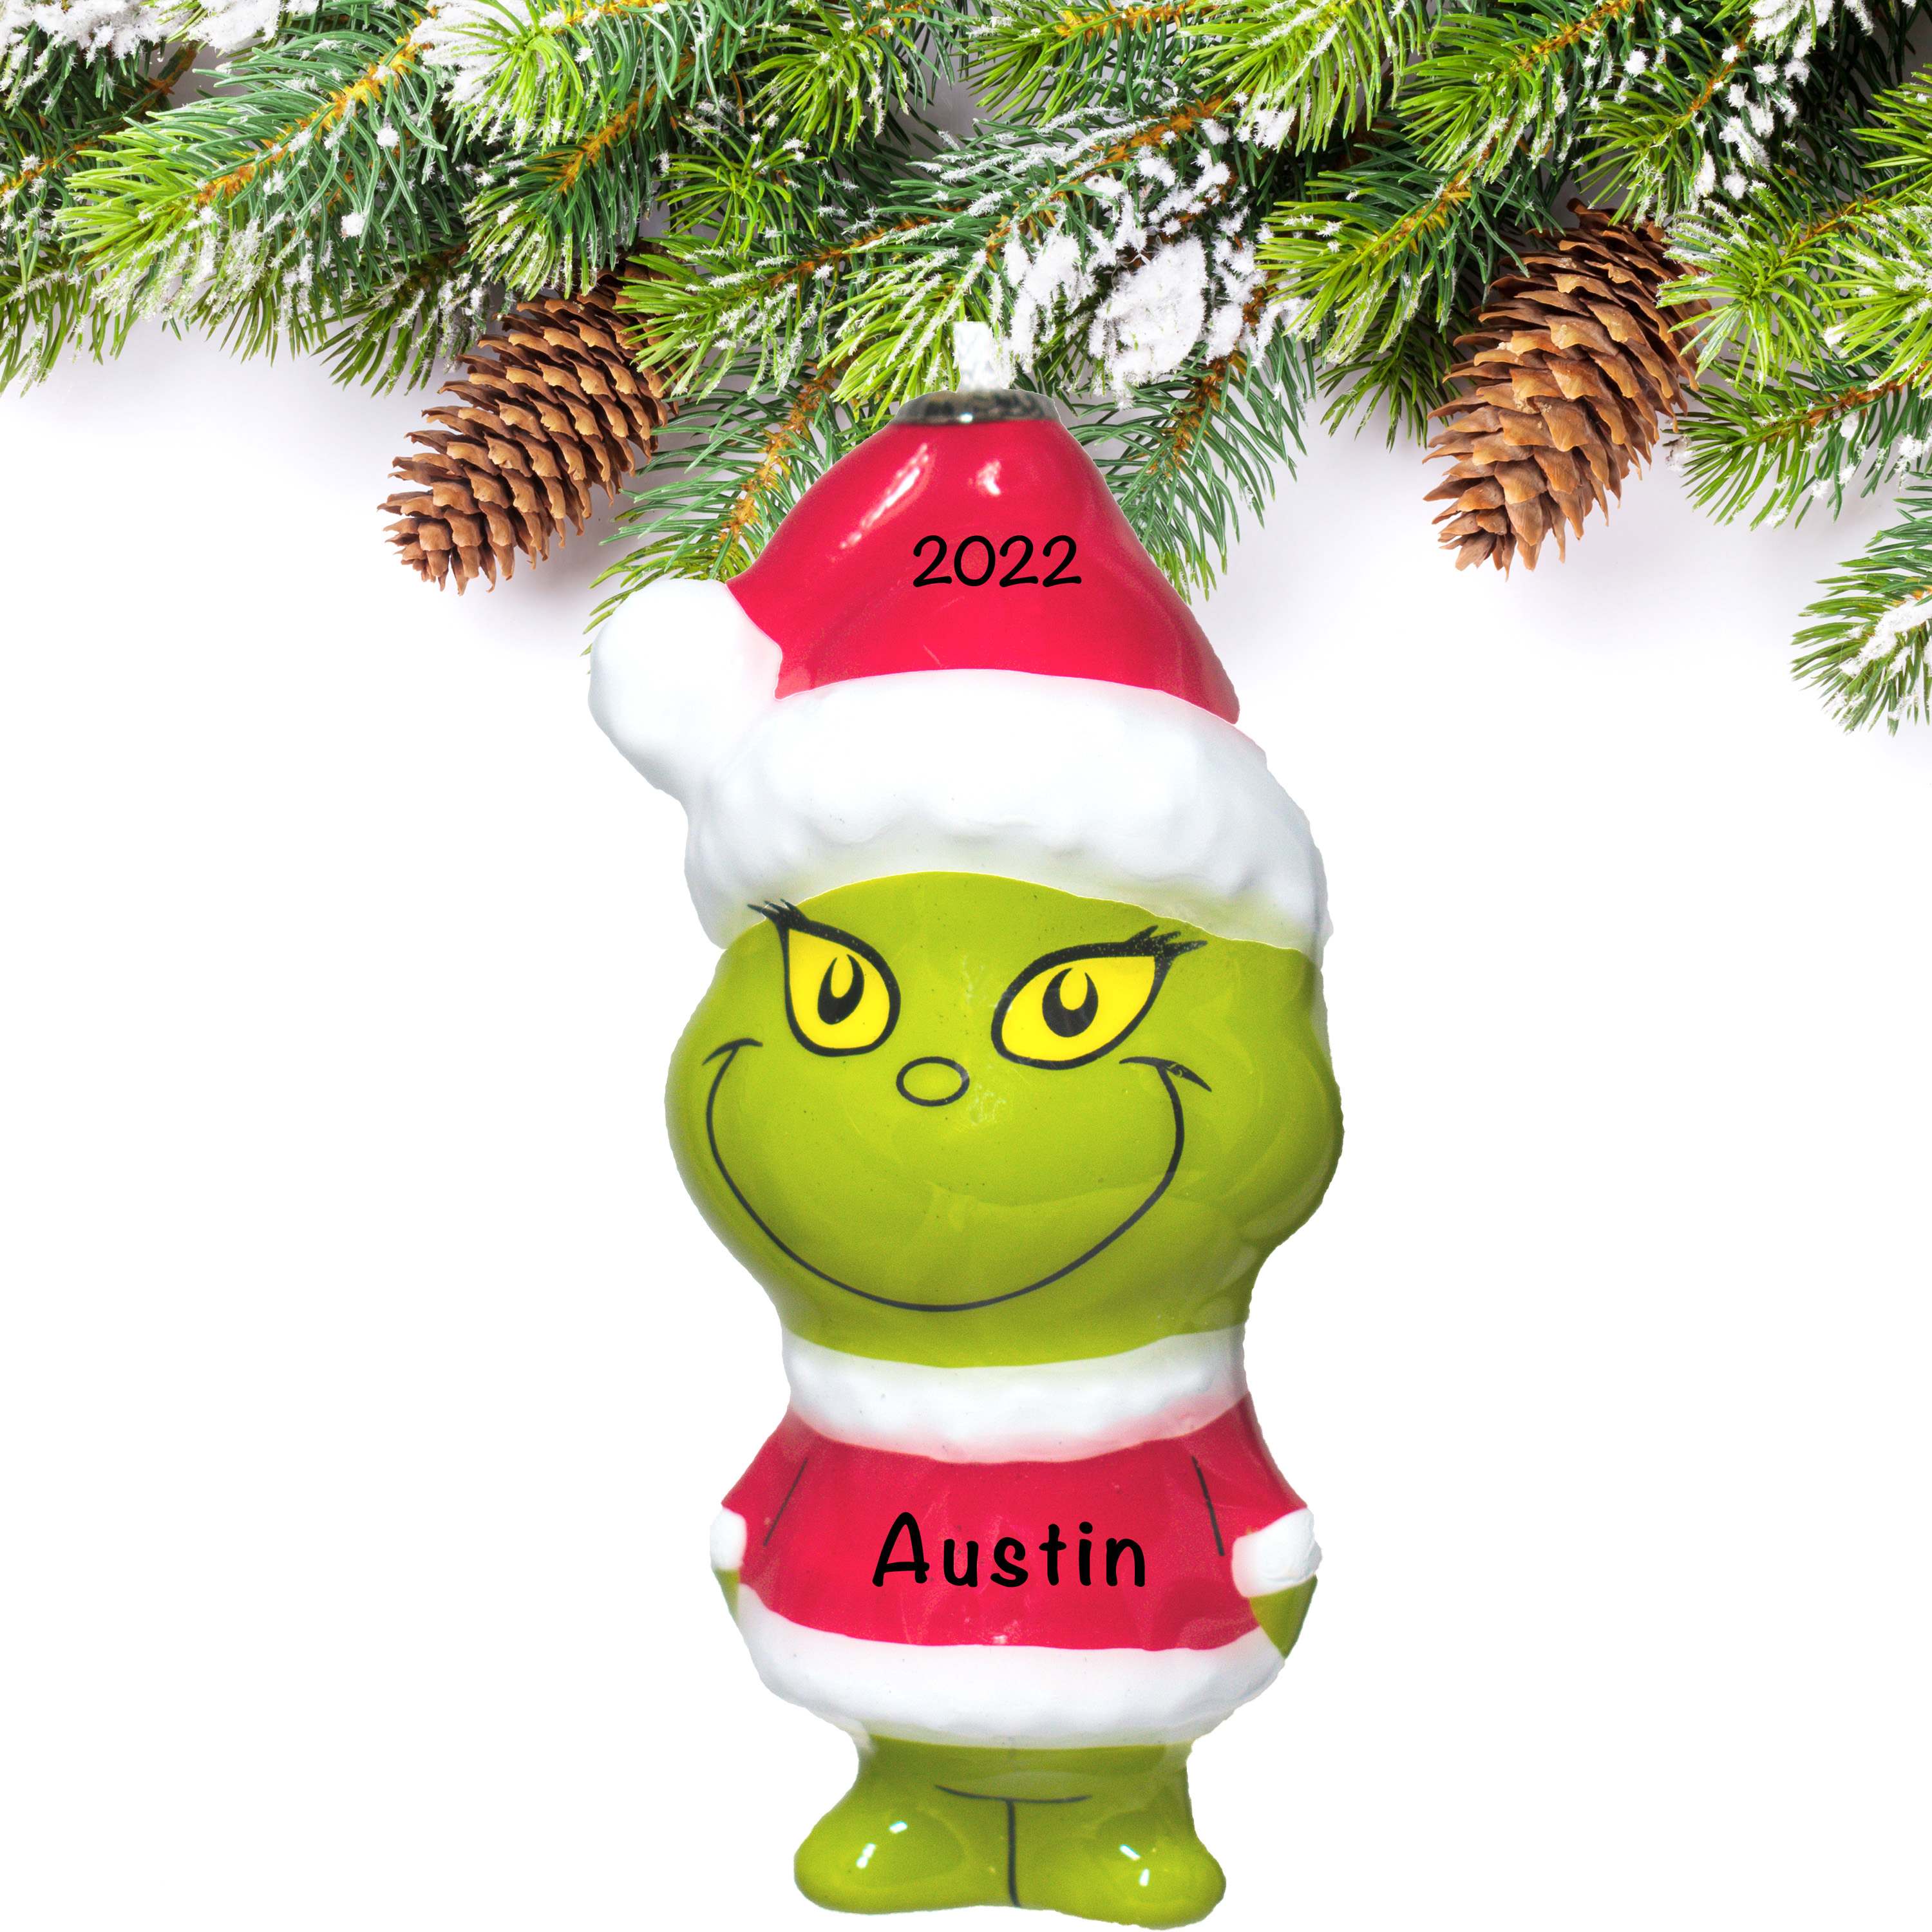 https://myornament.com/wp-content/uploads/2022/10/2HCM9400-The-Grinch-Christmas-Ornament-Personalized-Grinch-Ornament-for-Christmas-Tree-Holiday-Traditions-xmas-gift.jpg